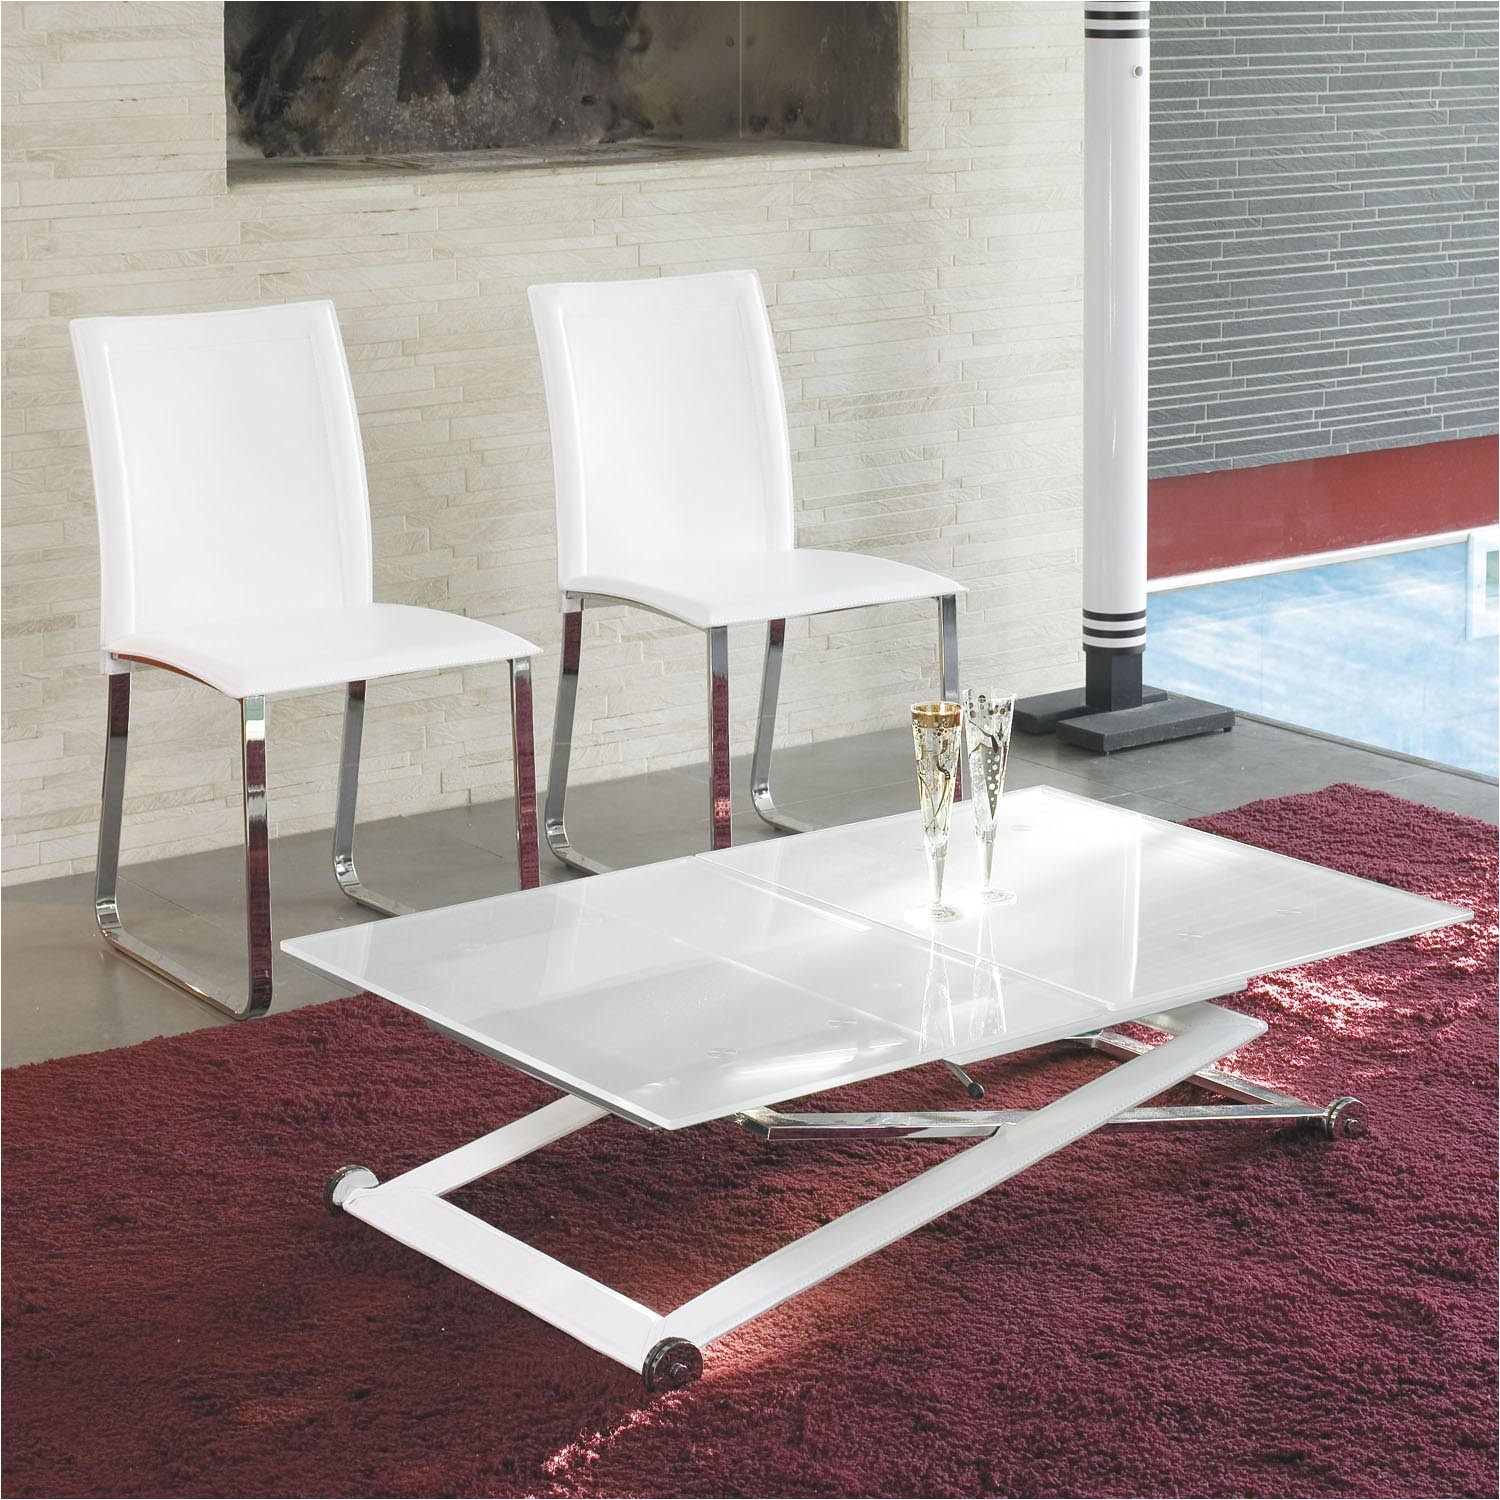 Height Adjustable Coffee Table Expandable Into Dining Table Height Adjustable Coffee Table Expandable Into Dining